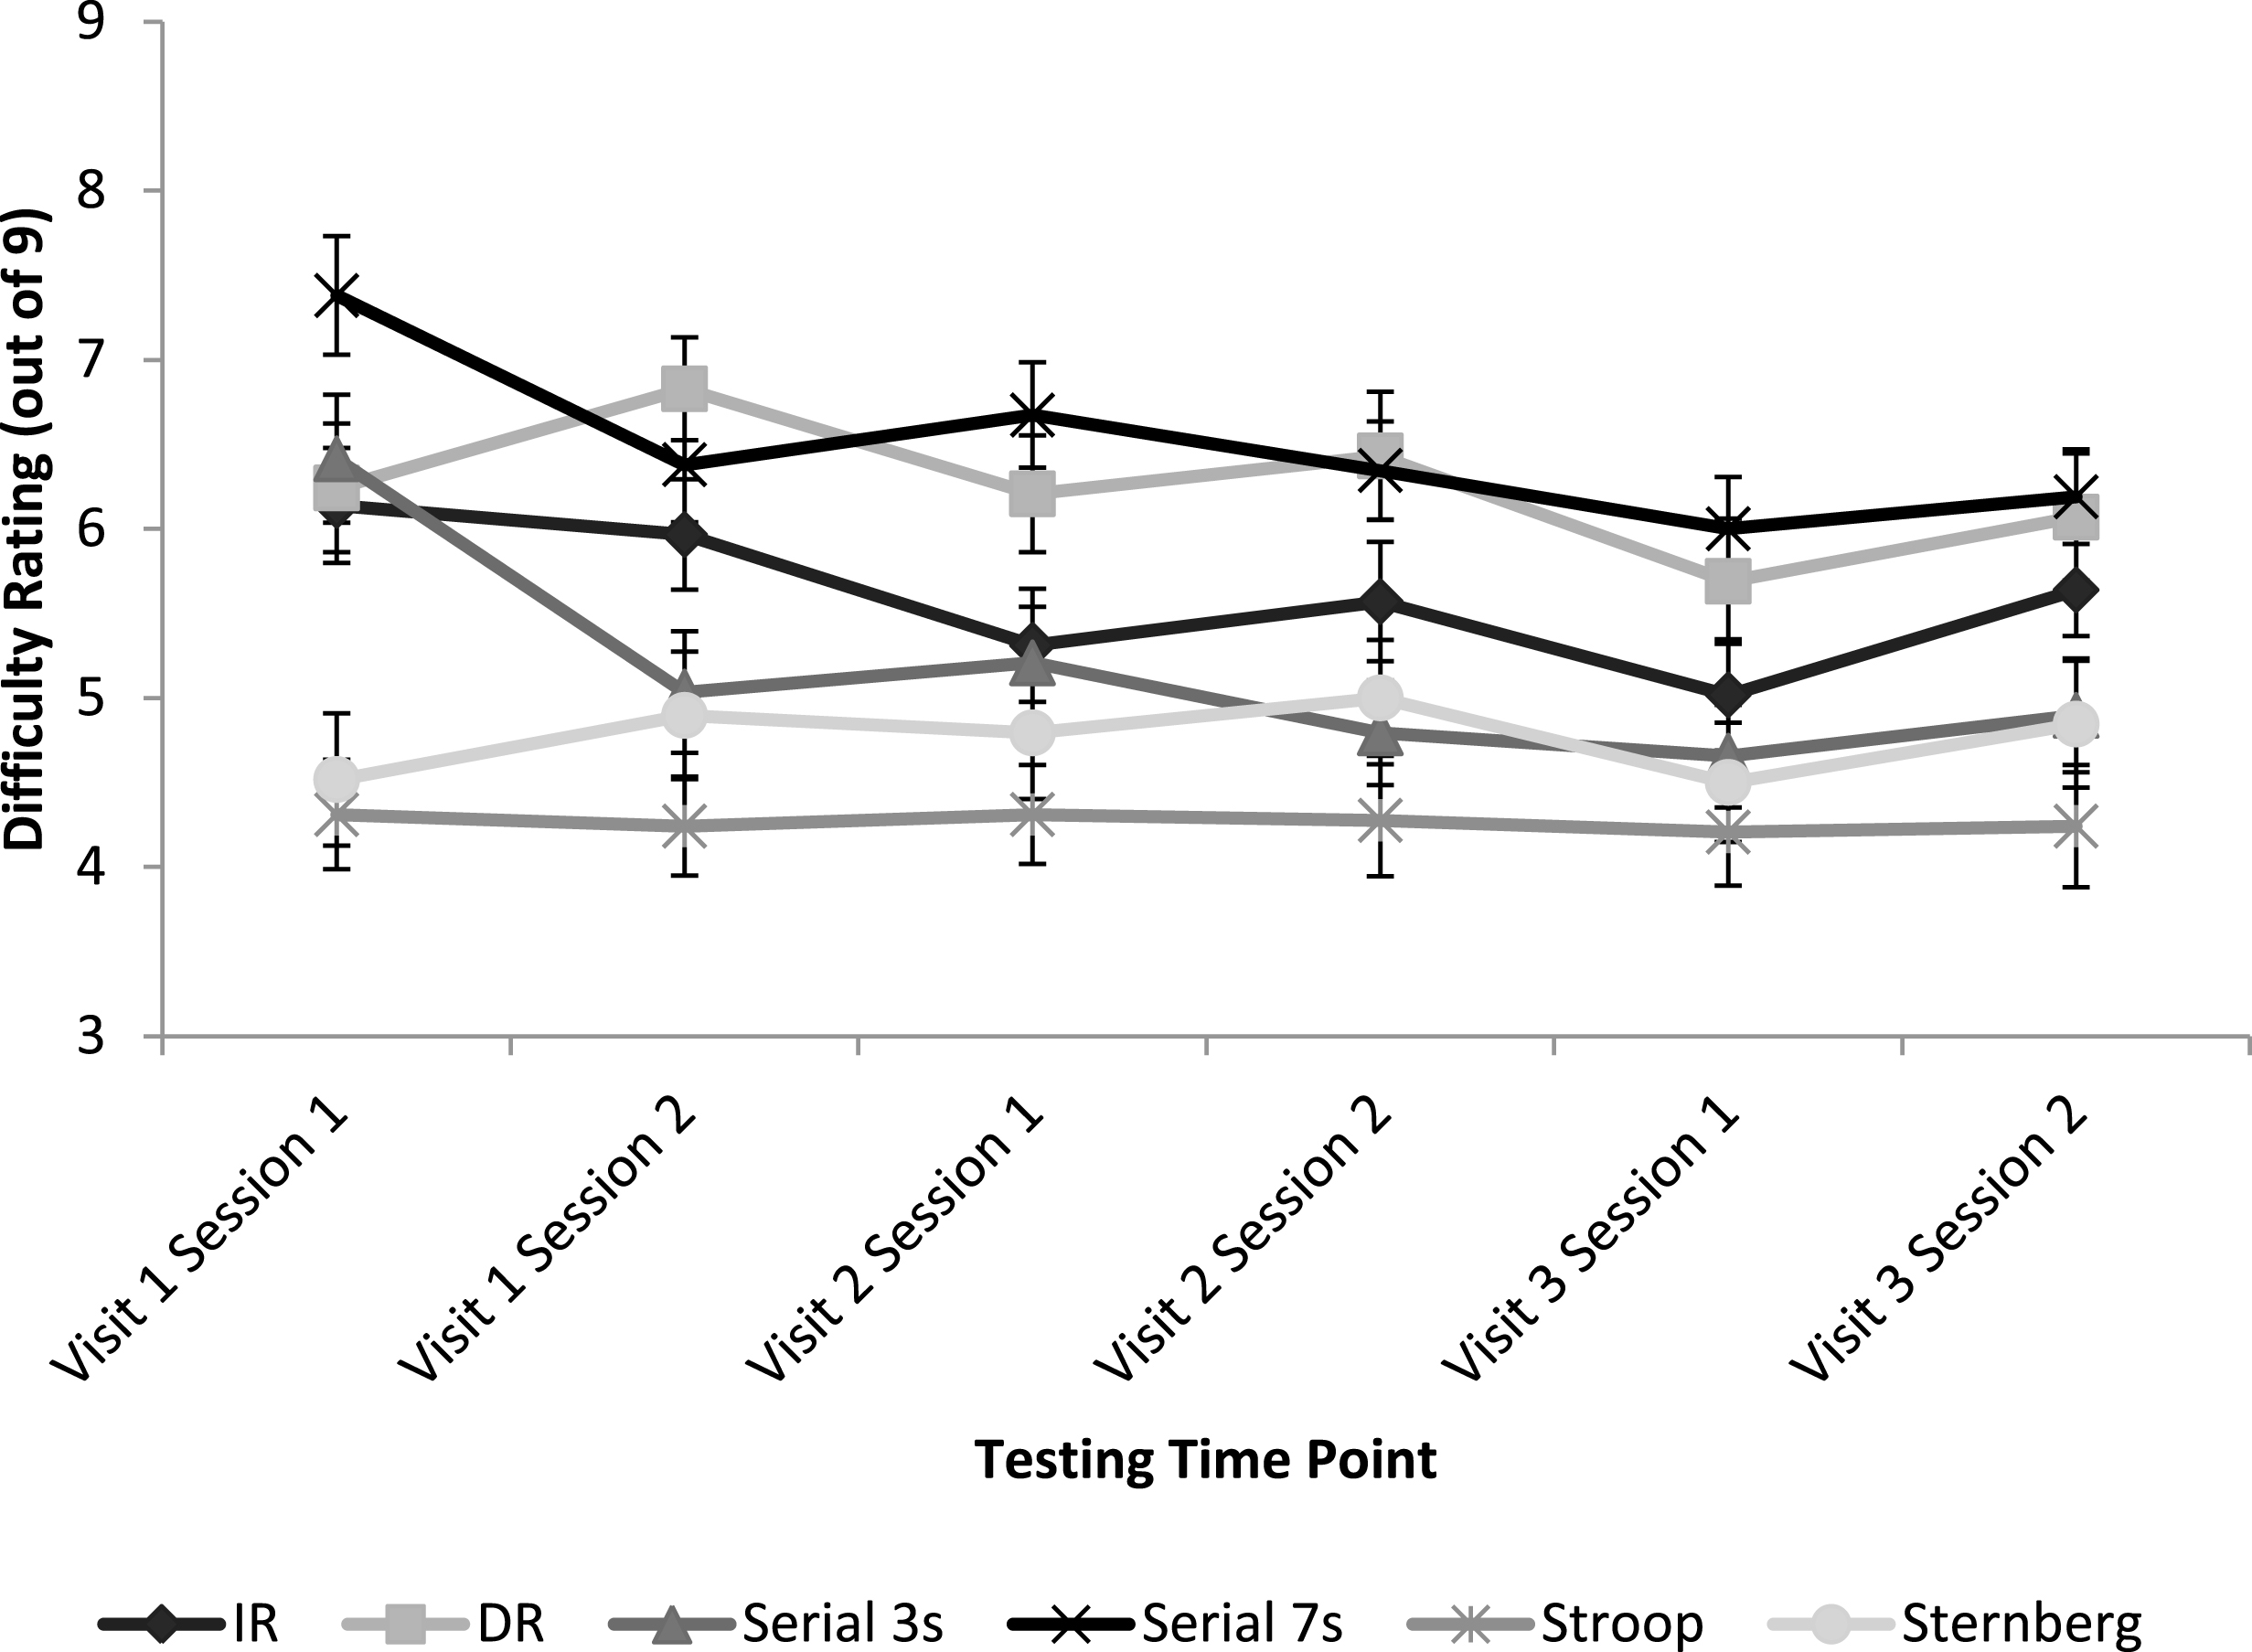 Mean subjective ratings of task difficulty for each cognitive task at each testing time point. Error bars represent mean standard error.